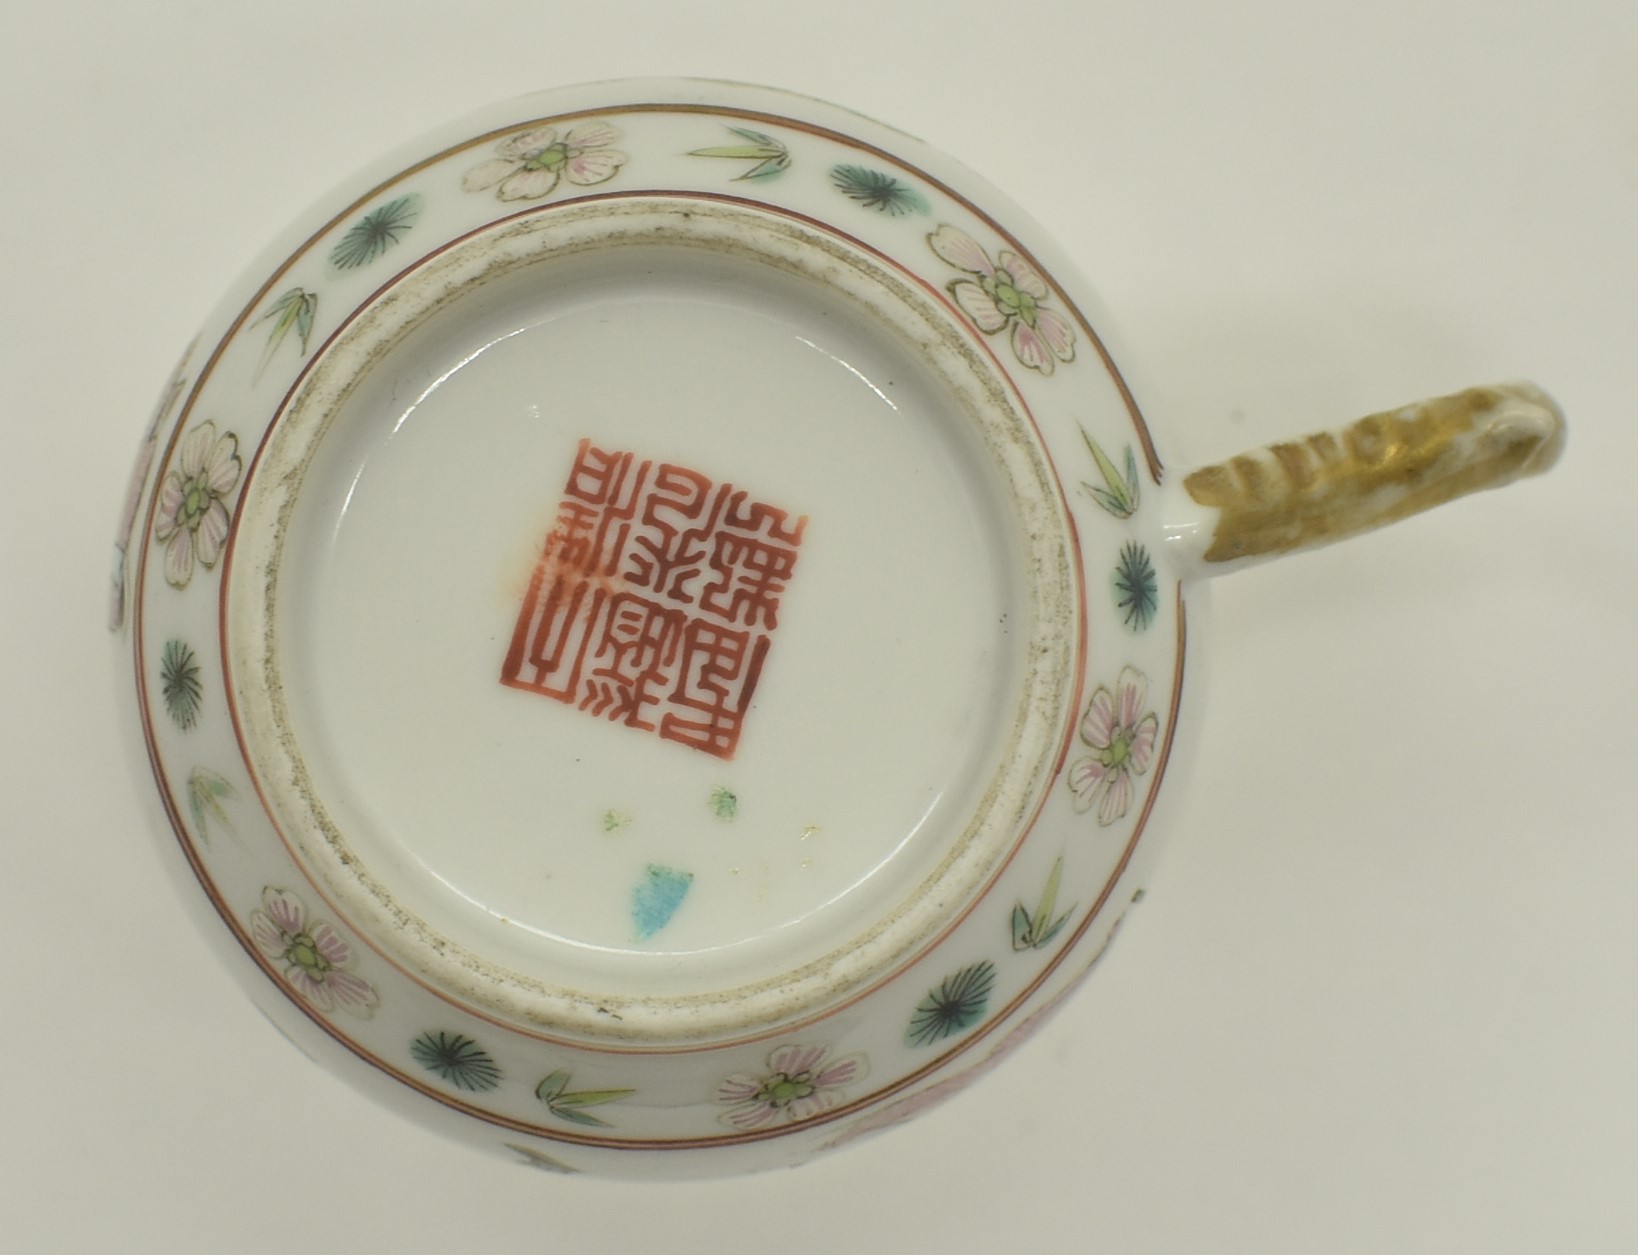 FAMILLE ROSE WU SHUANG PU CUP WITH HANDLE 道光粉彩无双谱人物杯 - Image 8 of 13